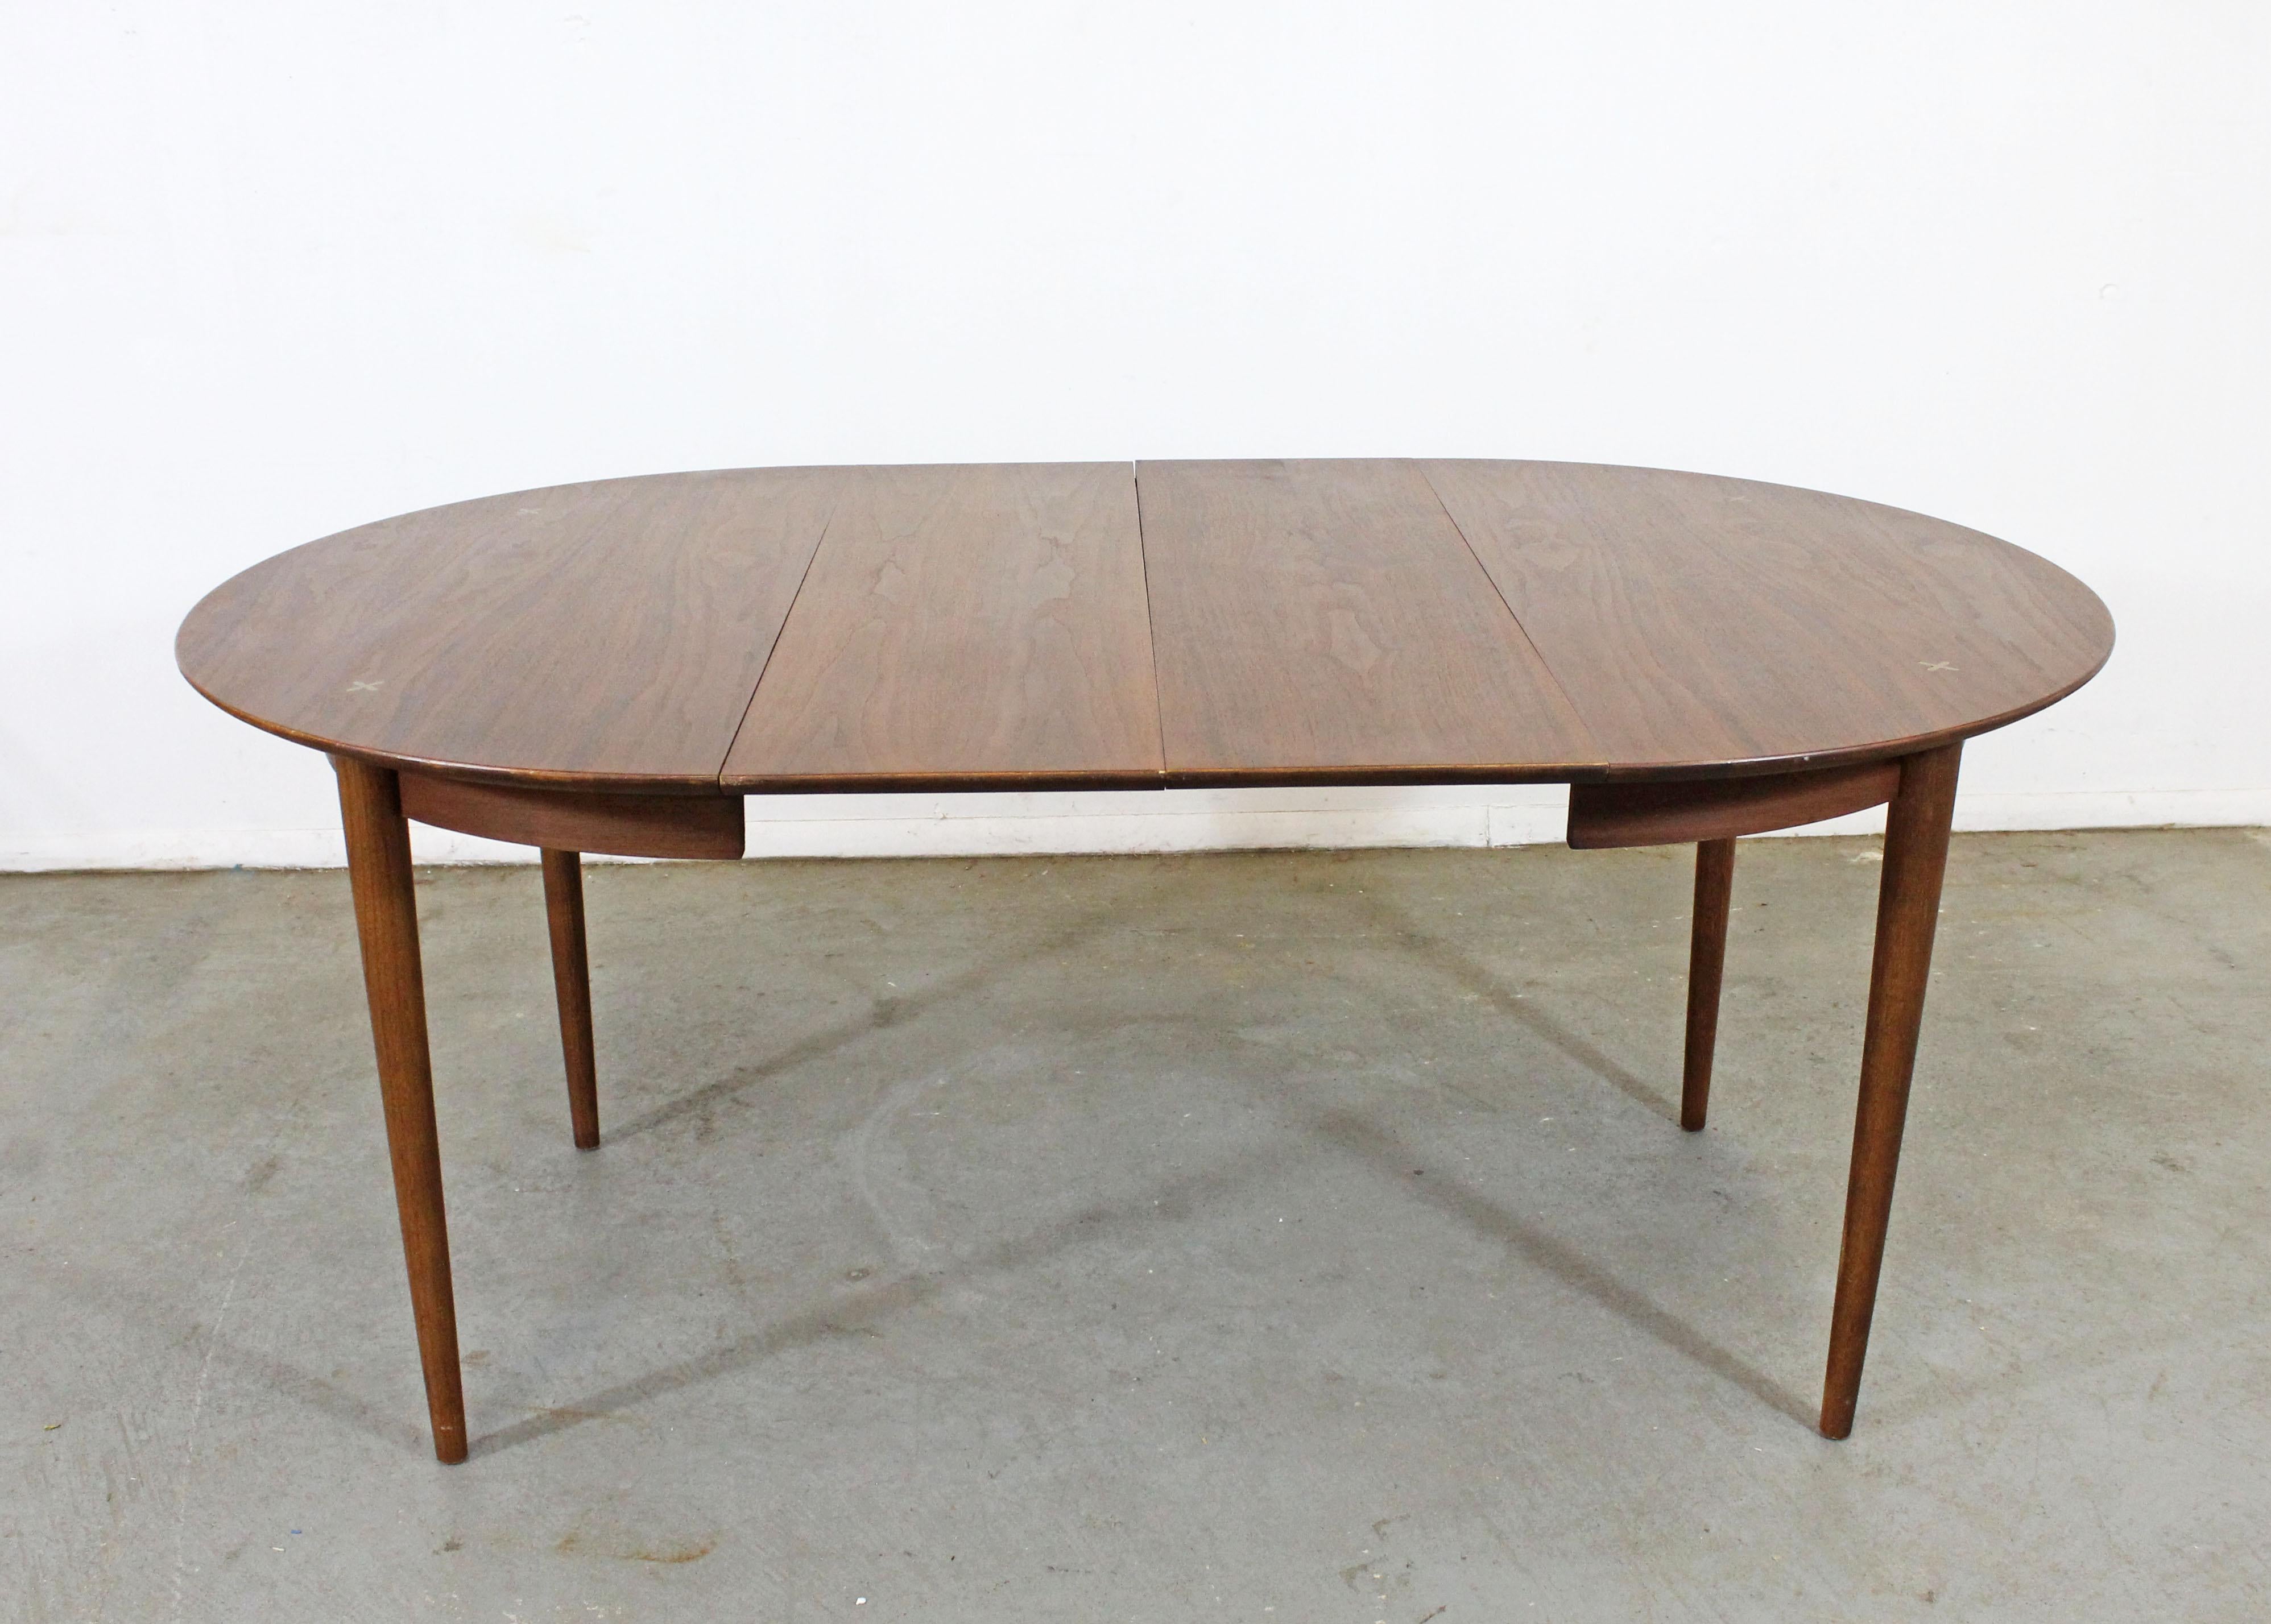 Offered is a vintage Mid-Century Modern walnut dining table made by American of Martinsville. This table features a rounded top and inlaid metal x's; an iconic feature in many pieces by American of Martinsville. Includes two extension boards, which